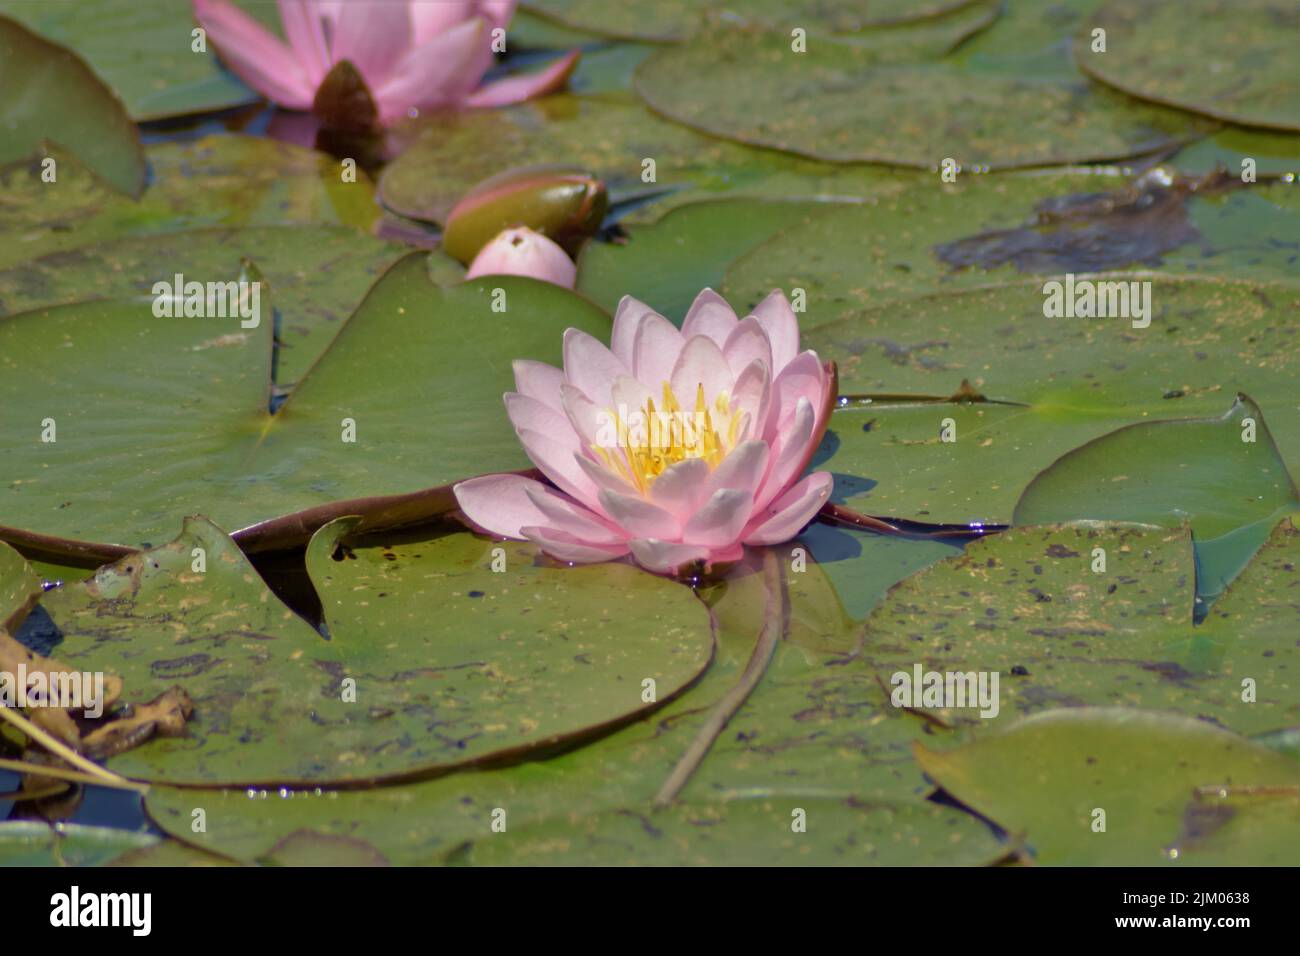 A selective focus shot of a pink lily water flower growing in the pond Stock Photo